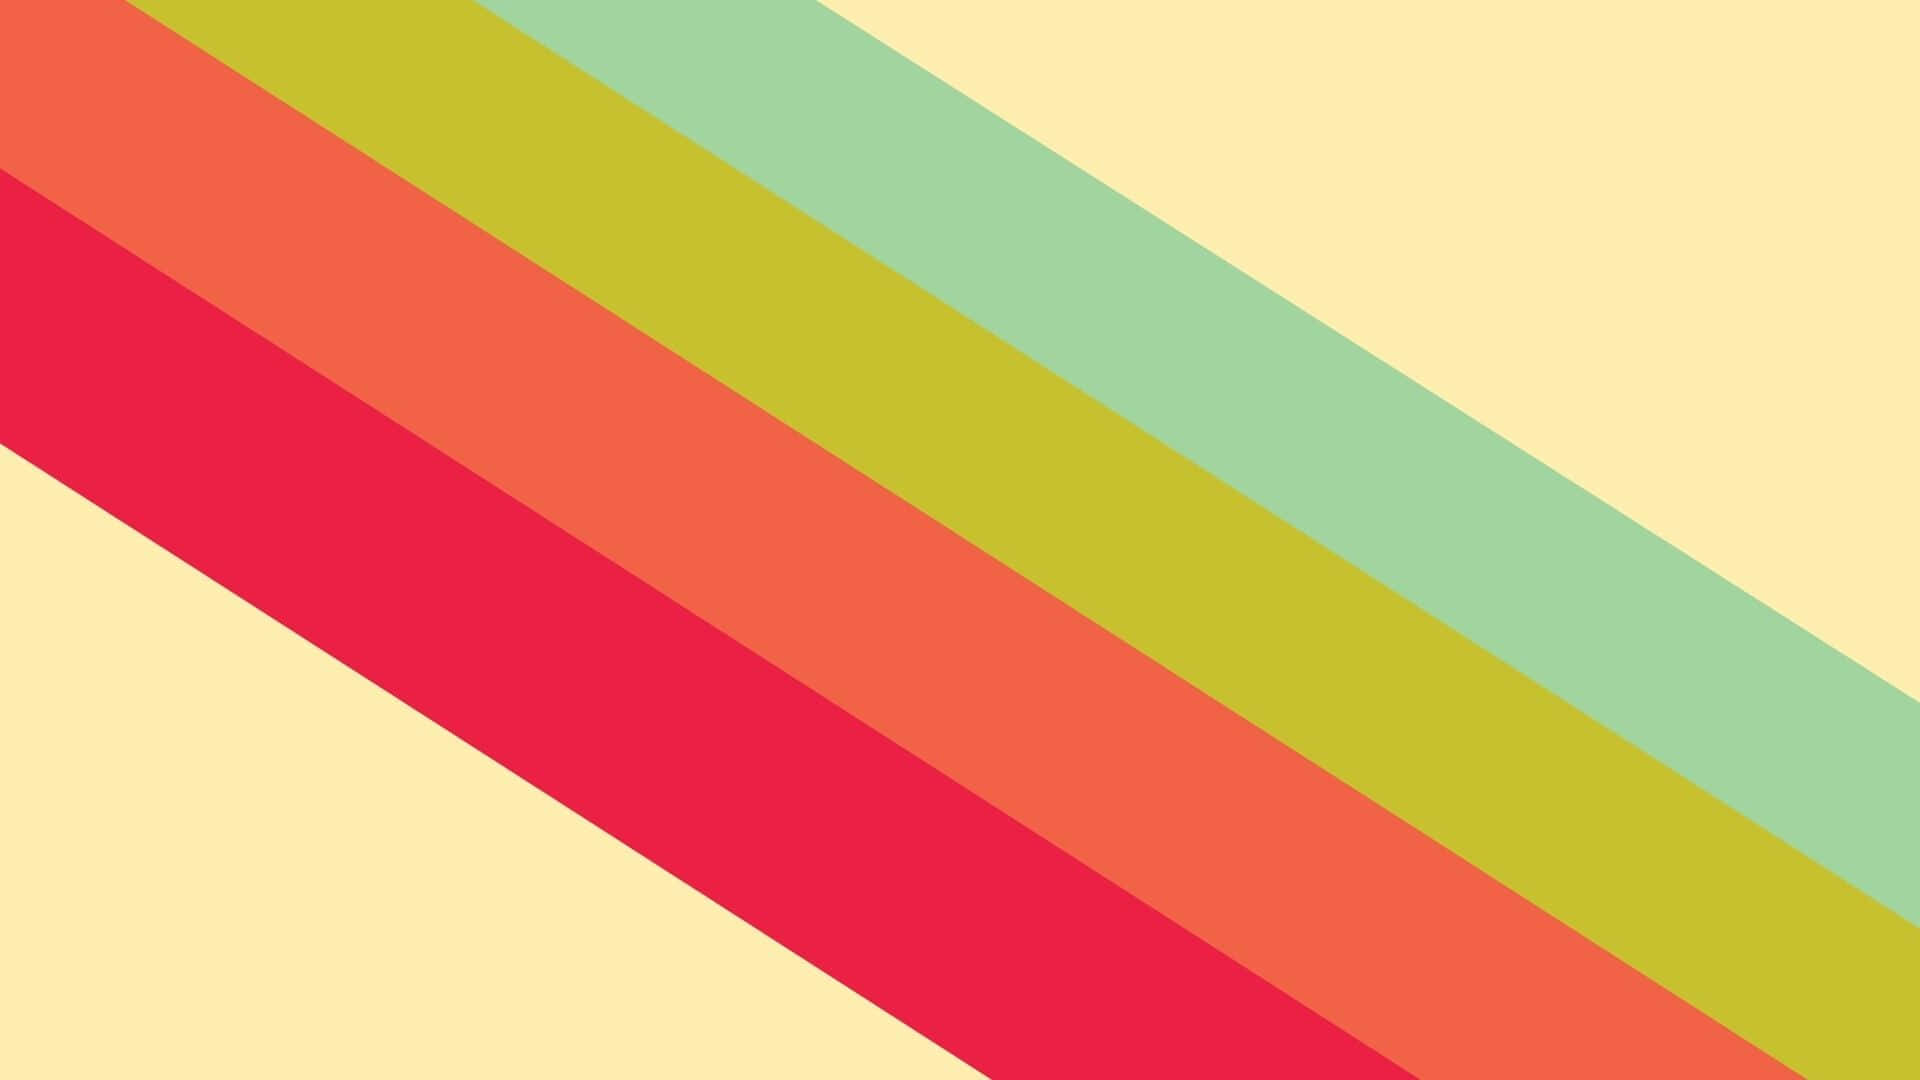 A Colorful Striped Background With A Yellow, Green, And Blue Stripe Wallpaper